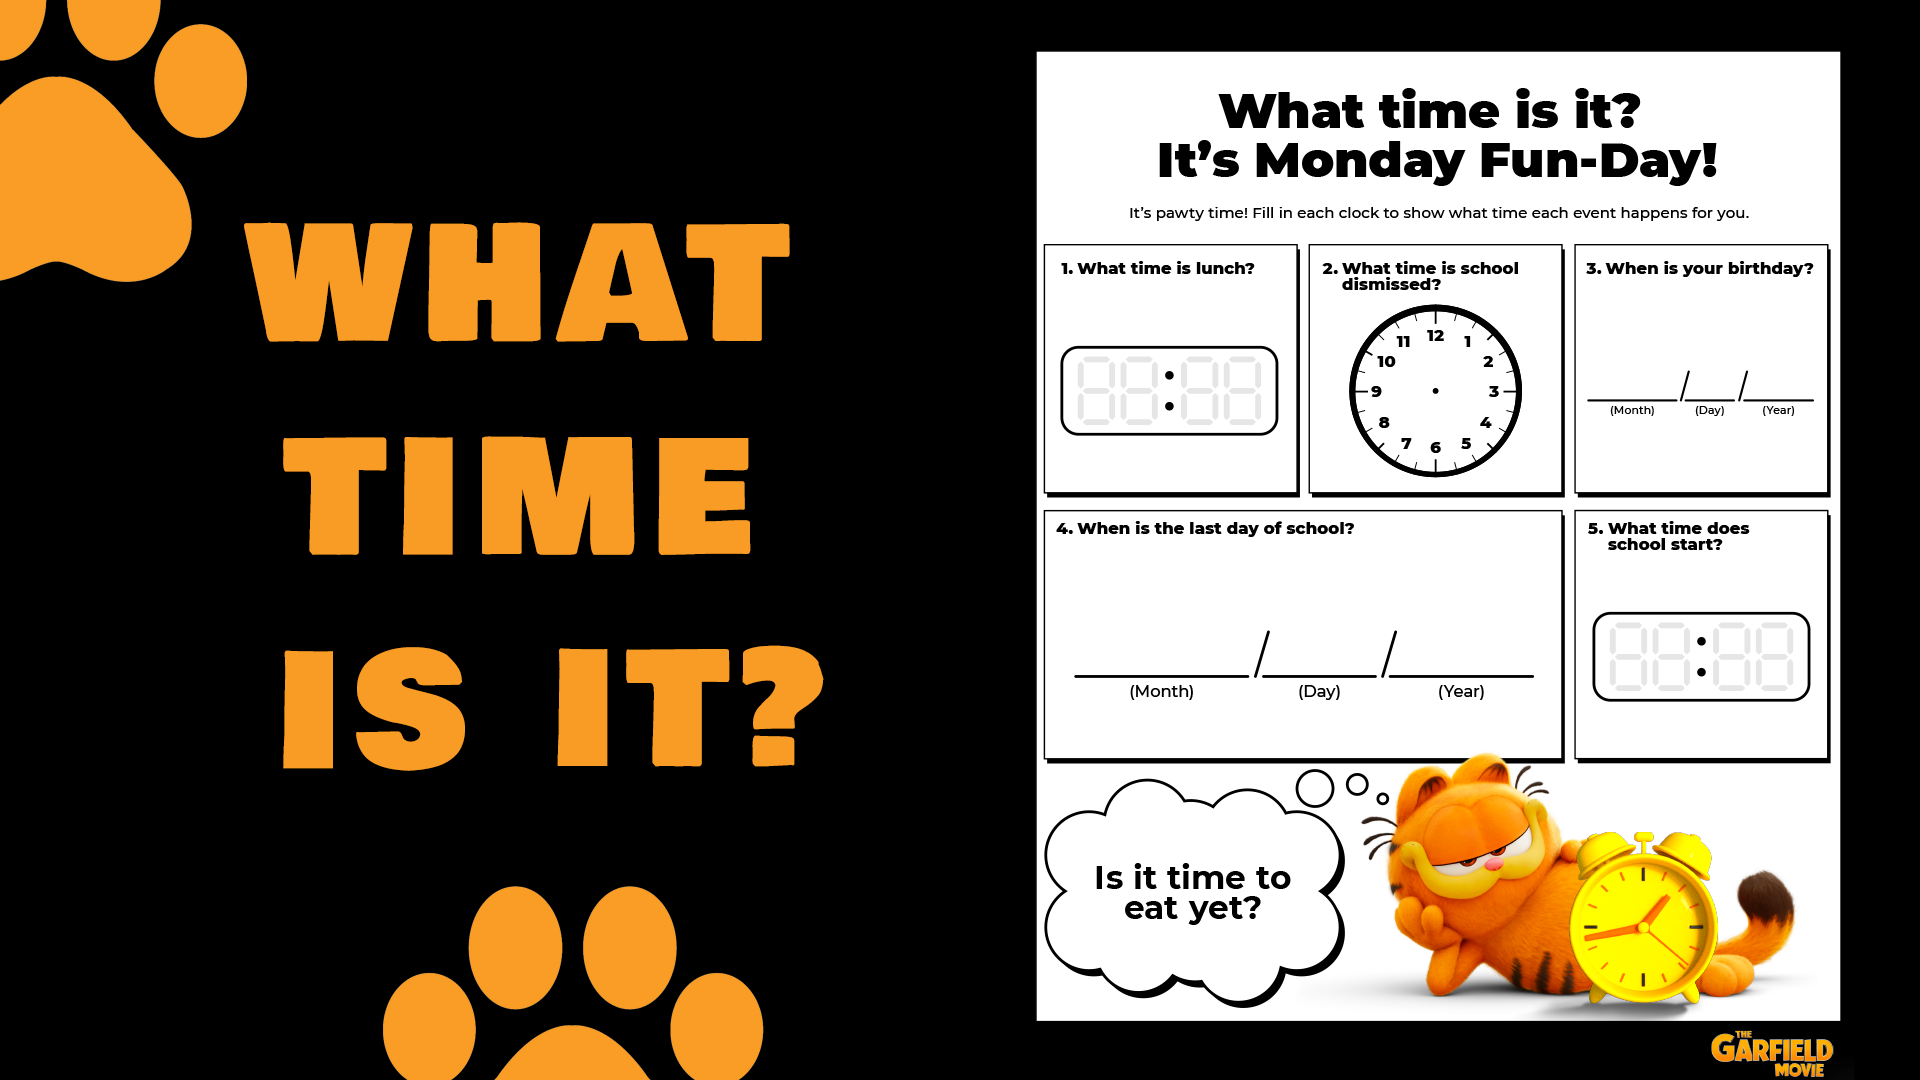 What time is it? It's Monday Fun-Day!